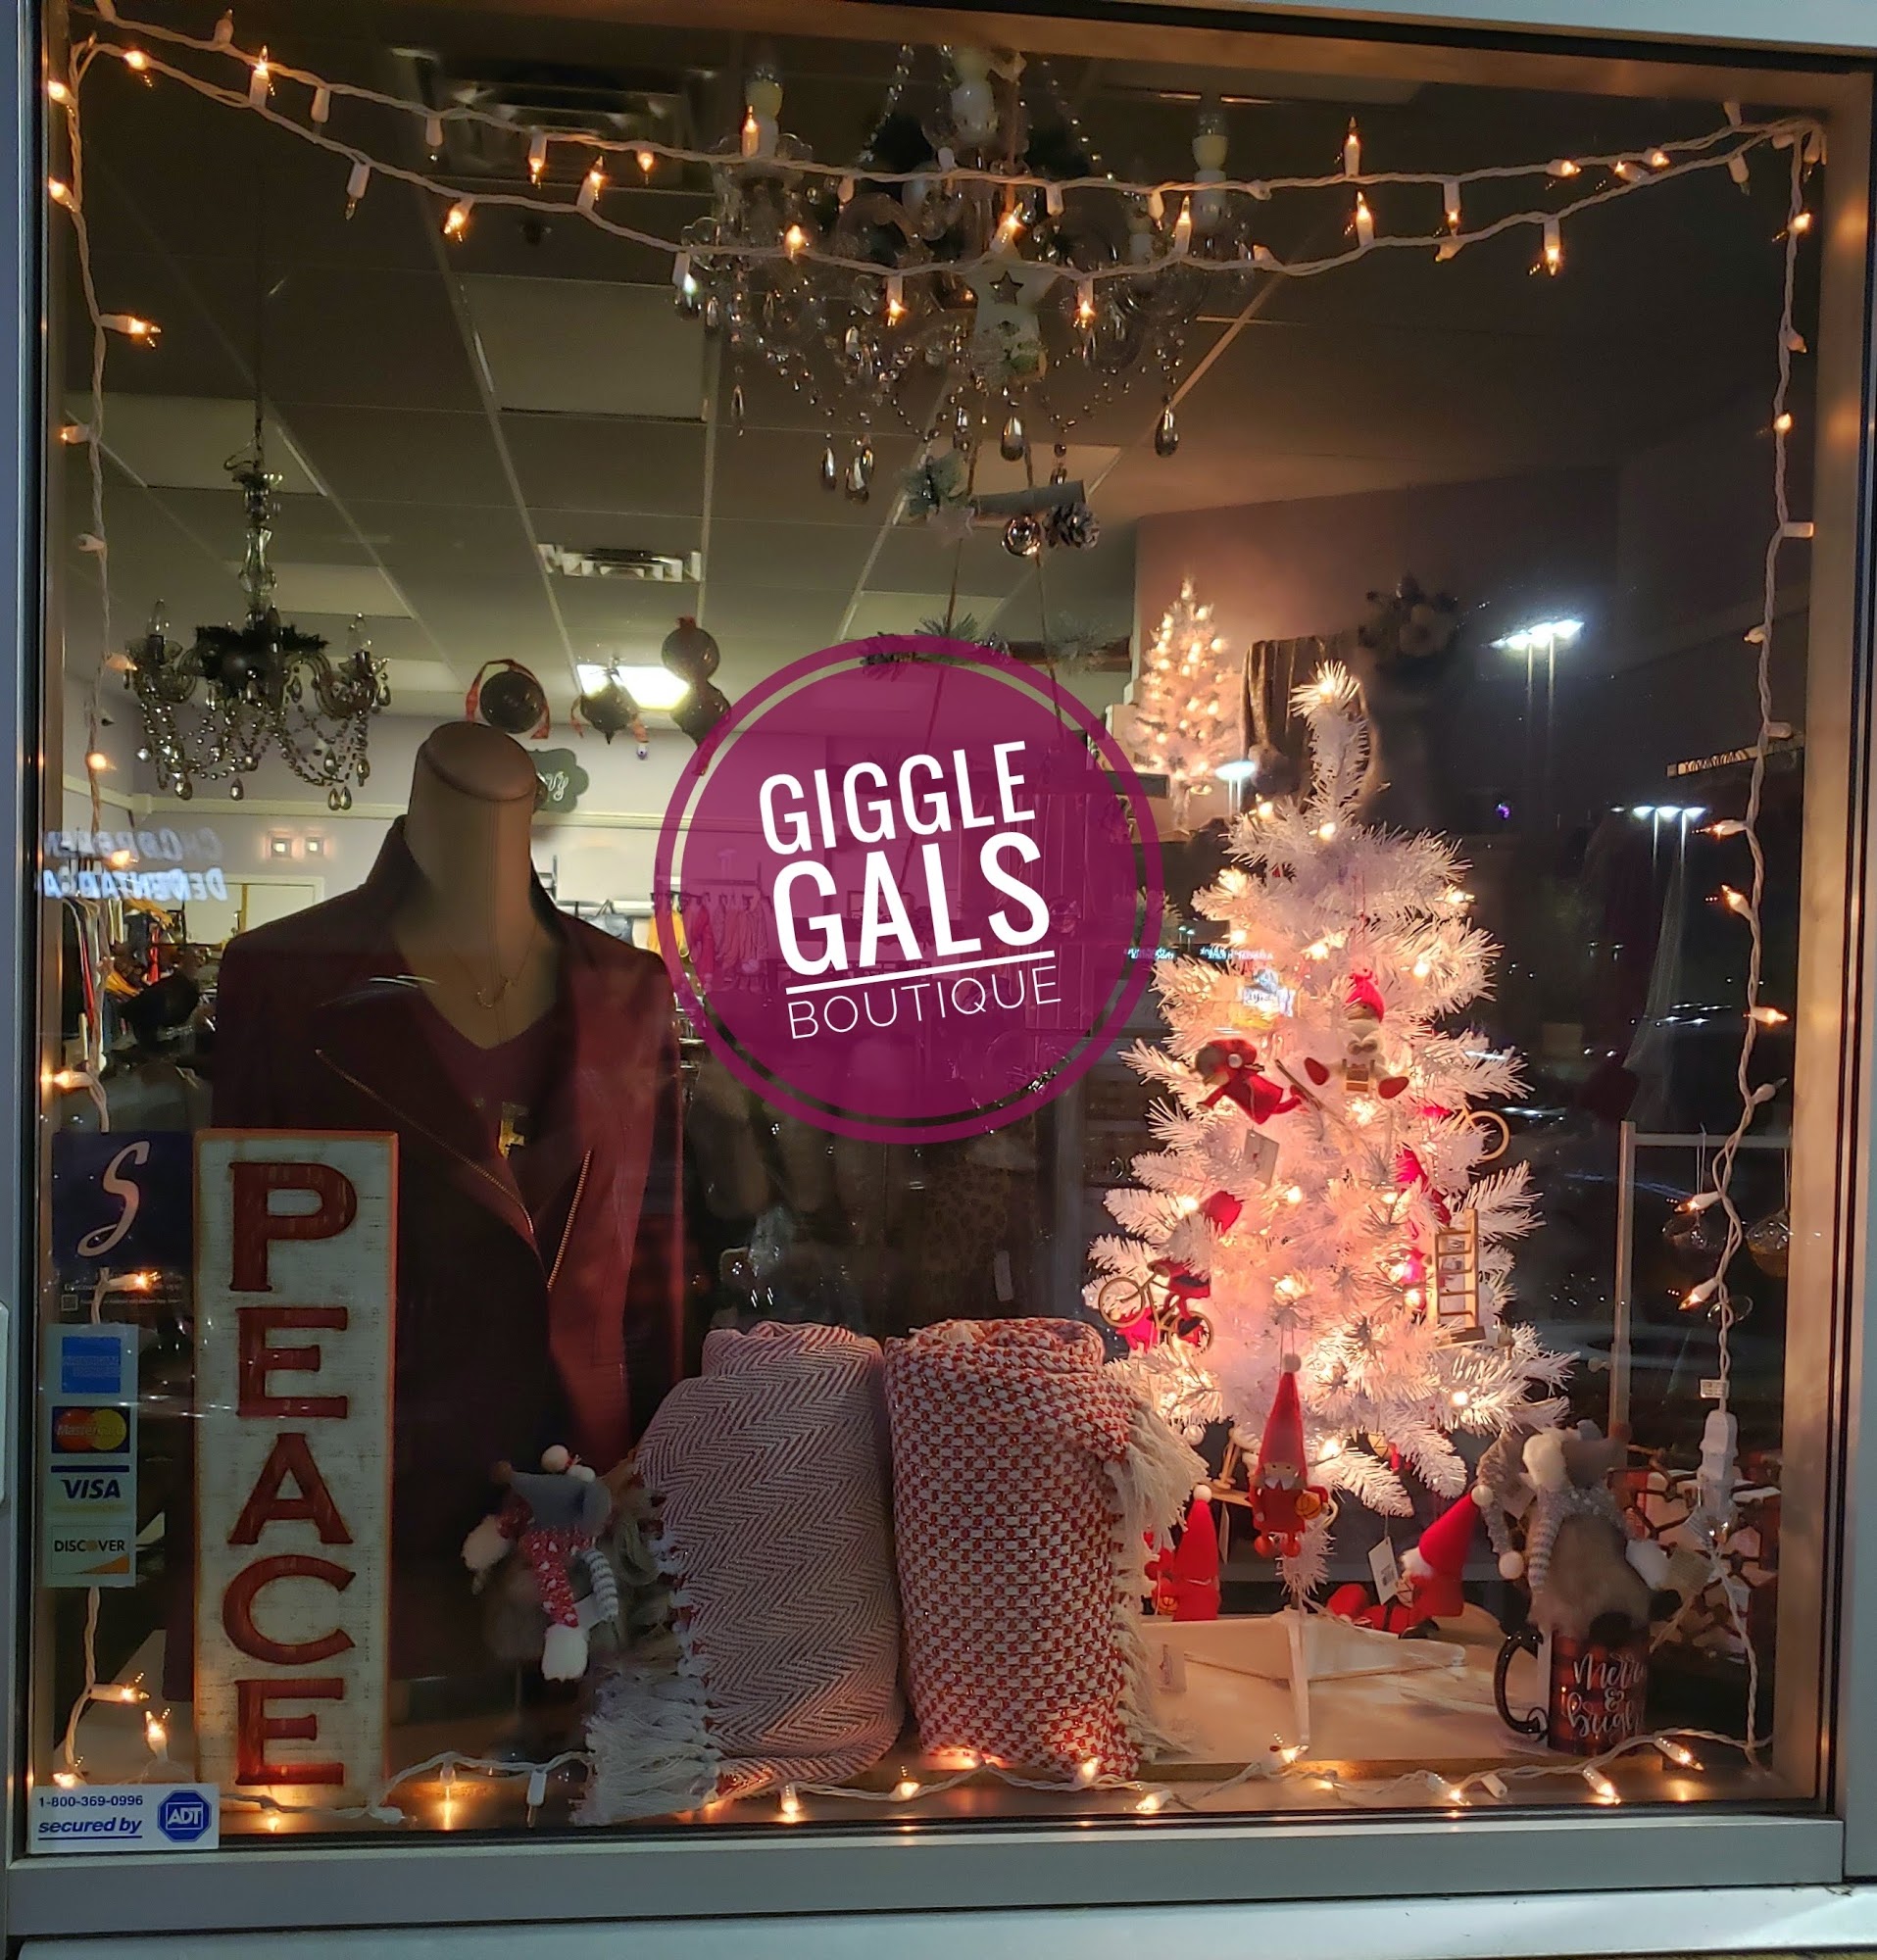 Giggle Gals Boutique